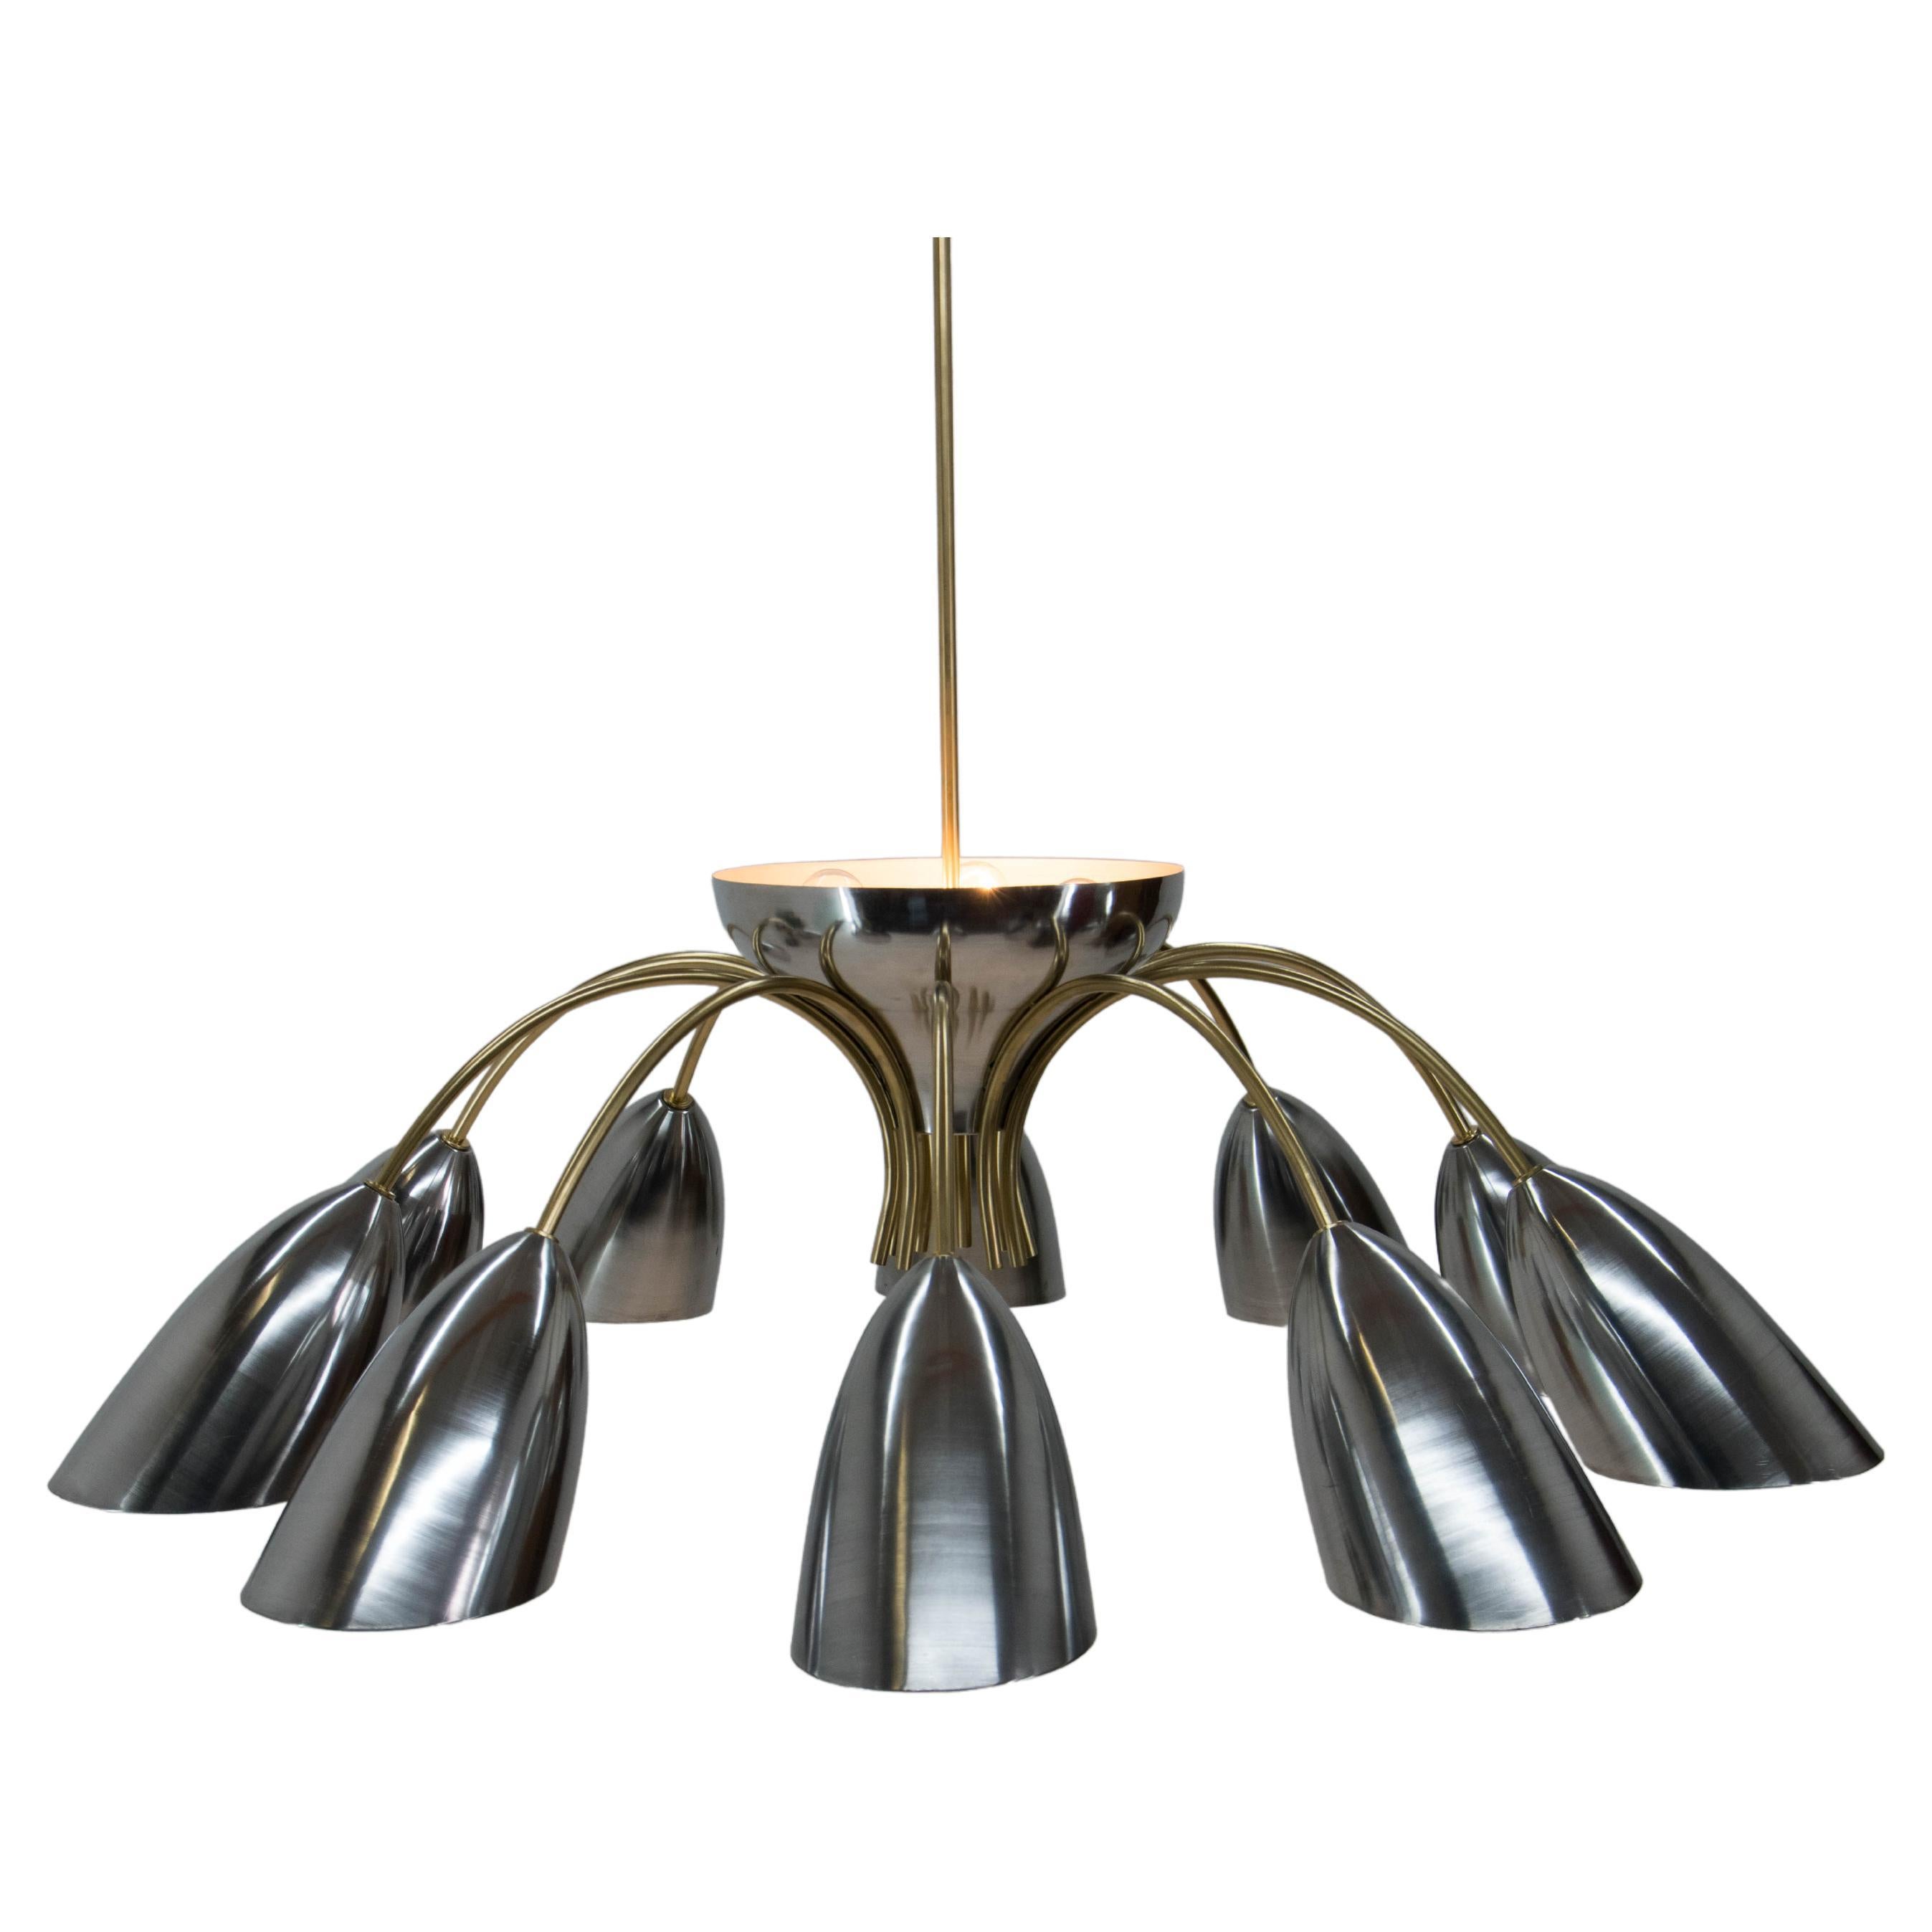 Huge Space Age Chandelier, 1960s, Two Items Available For Sale